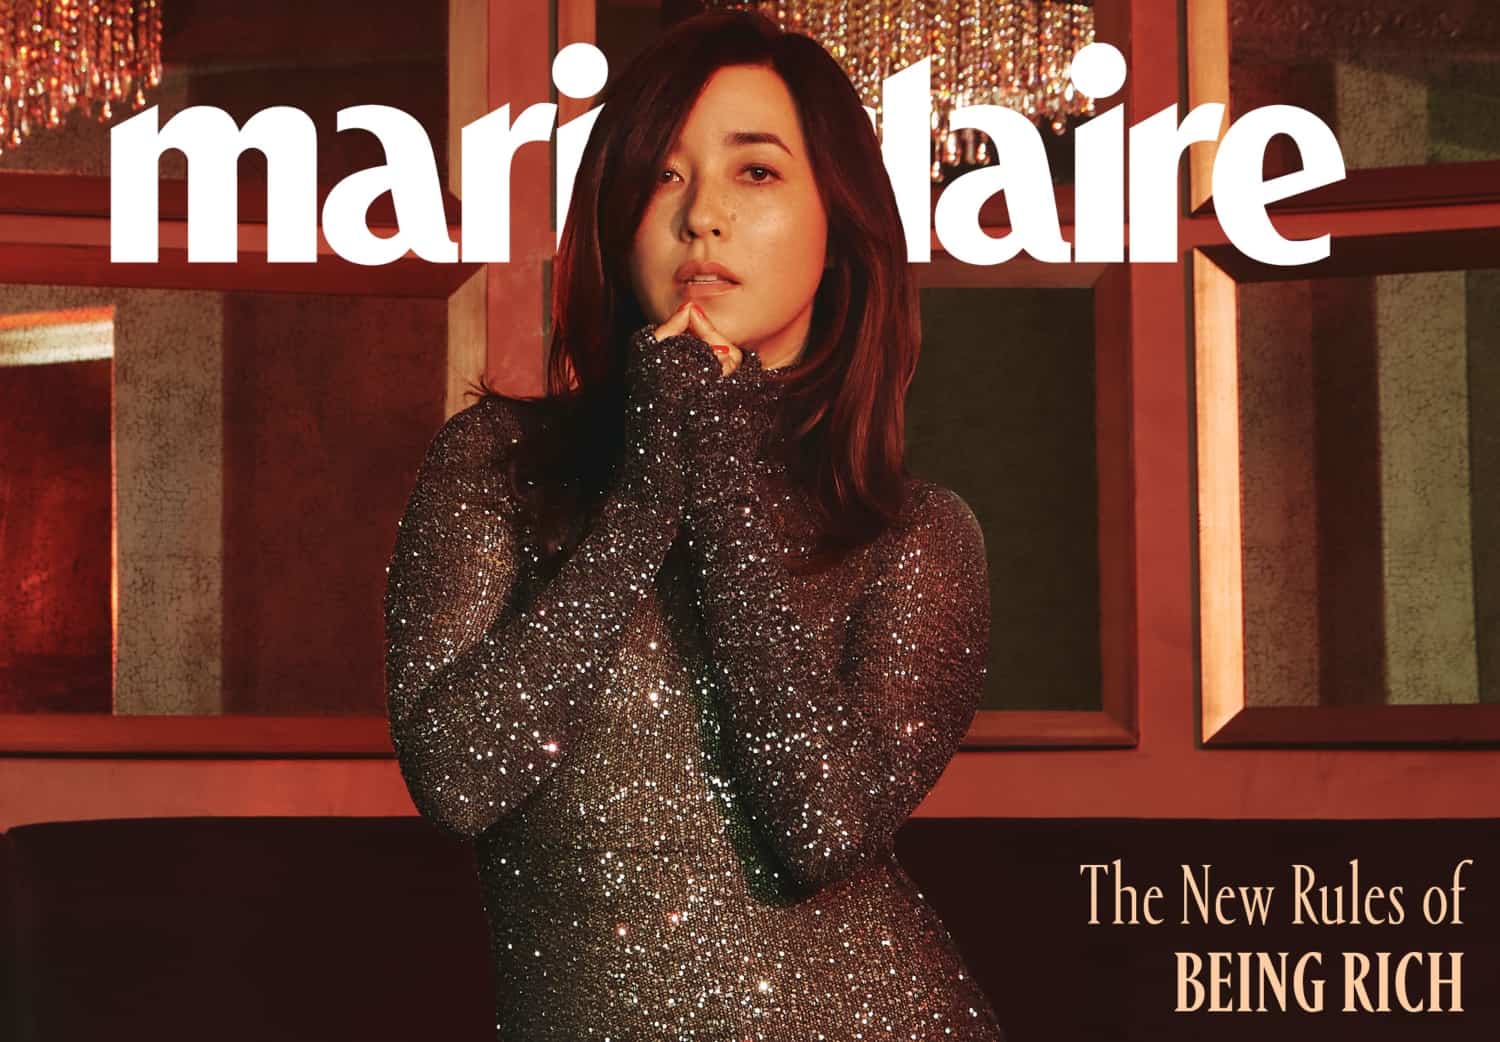 A New Editor At Marie Claire, And More Of This Week’s Moves To Peruse